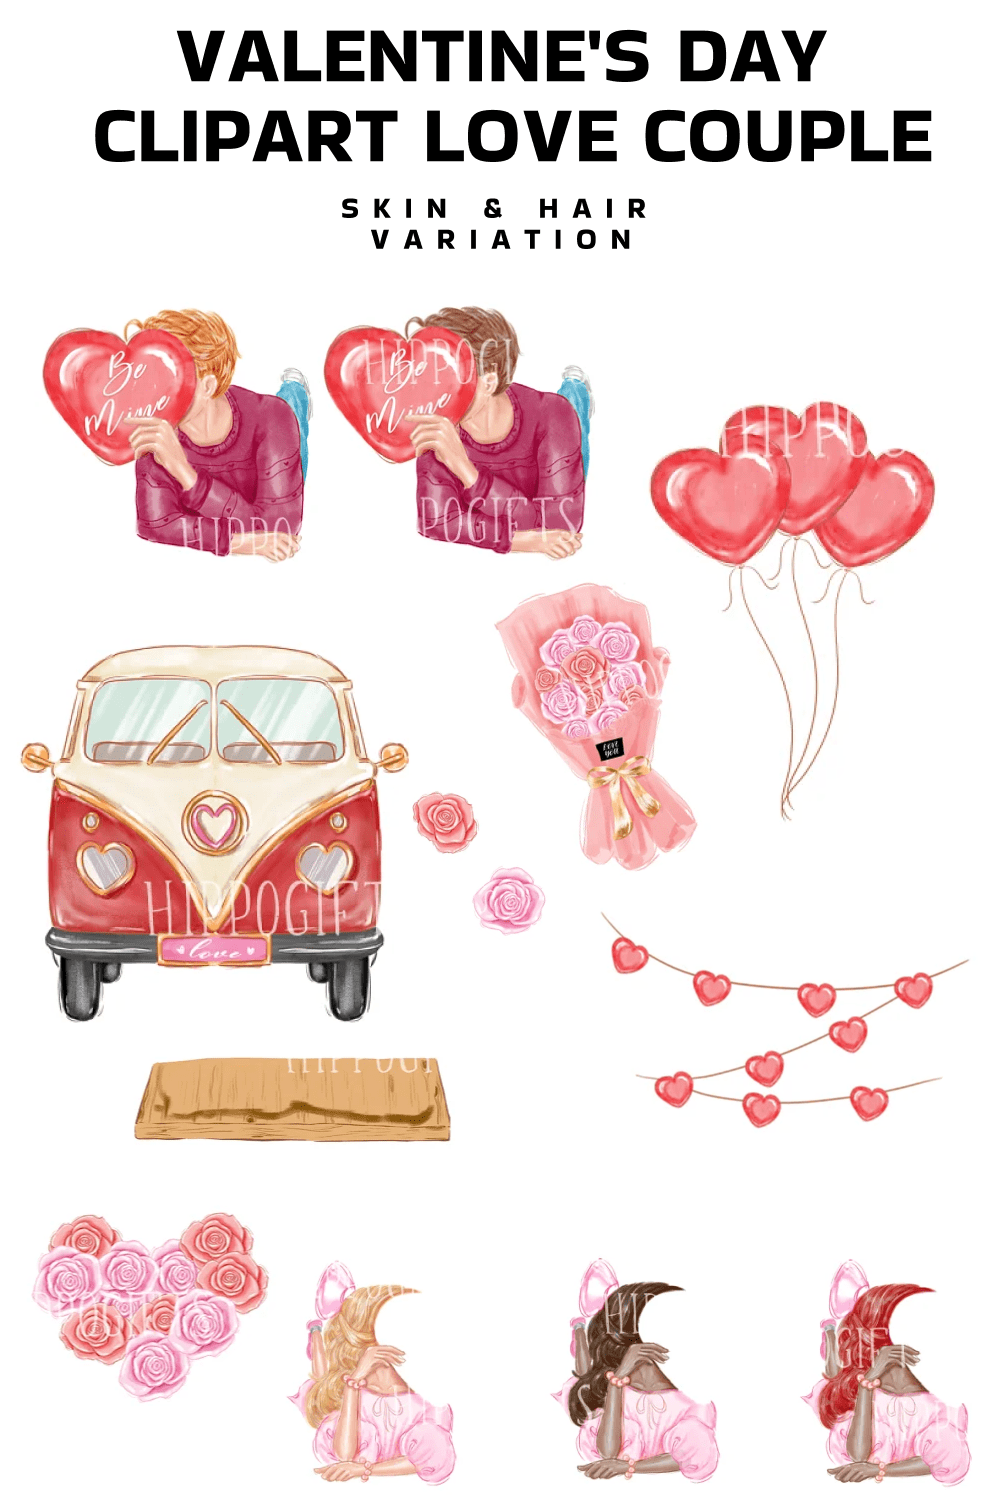 Valentine's Day Clipart Love Couple - pinterest image preview.